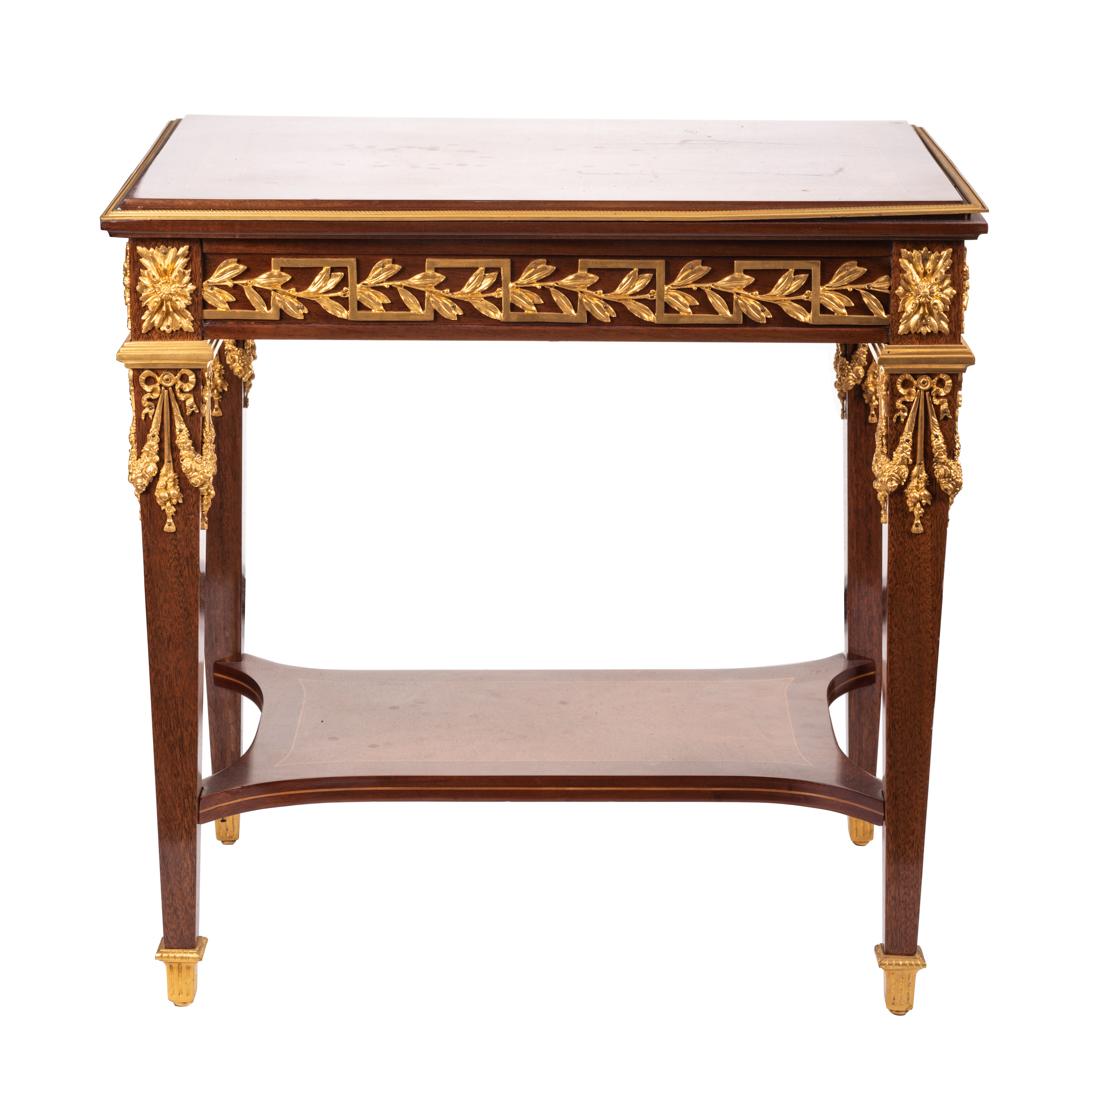 Early 20th Century Louis XVI Style Table in Solid Amaranth with Gilt Bronze Mounts For Sale